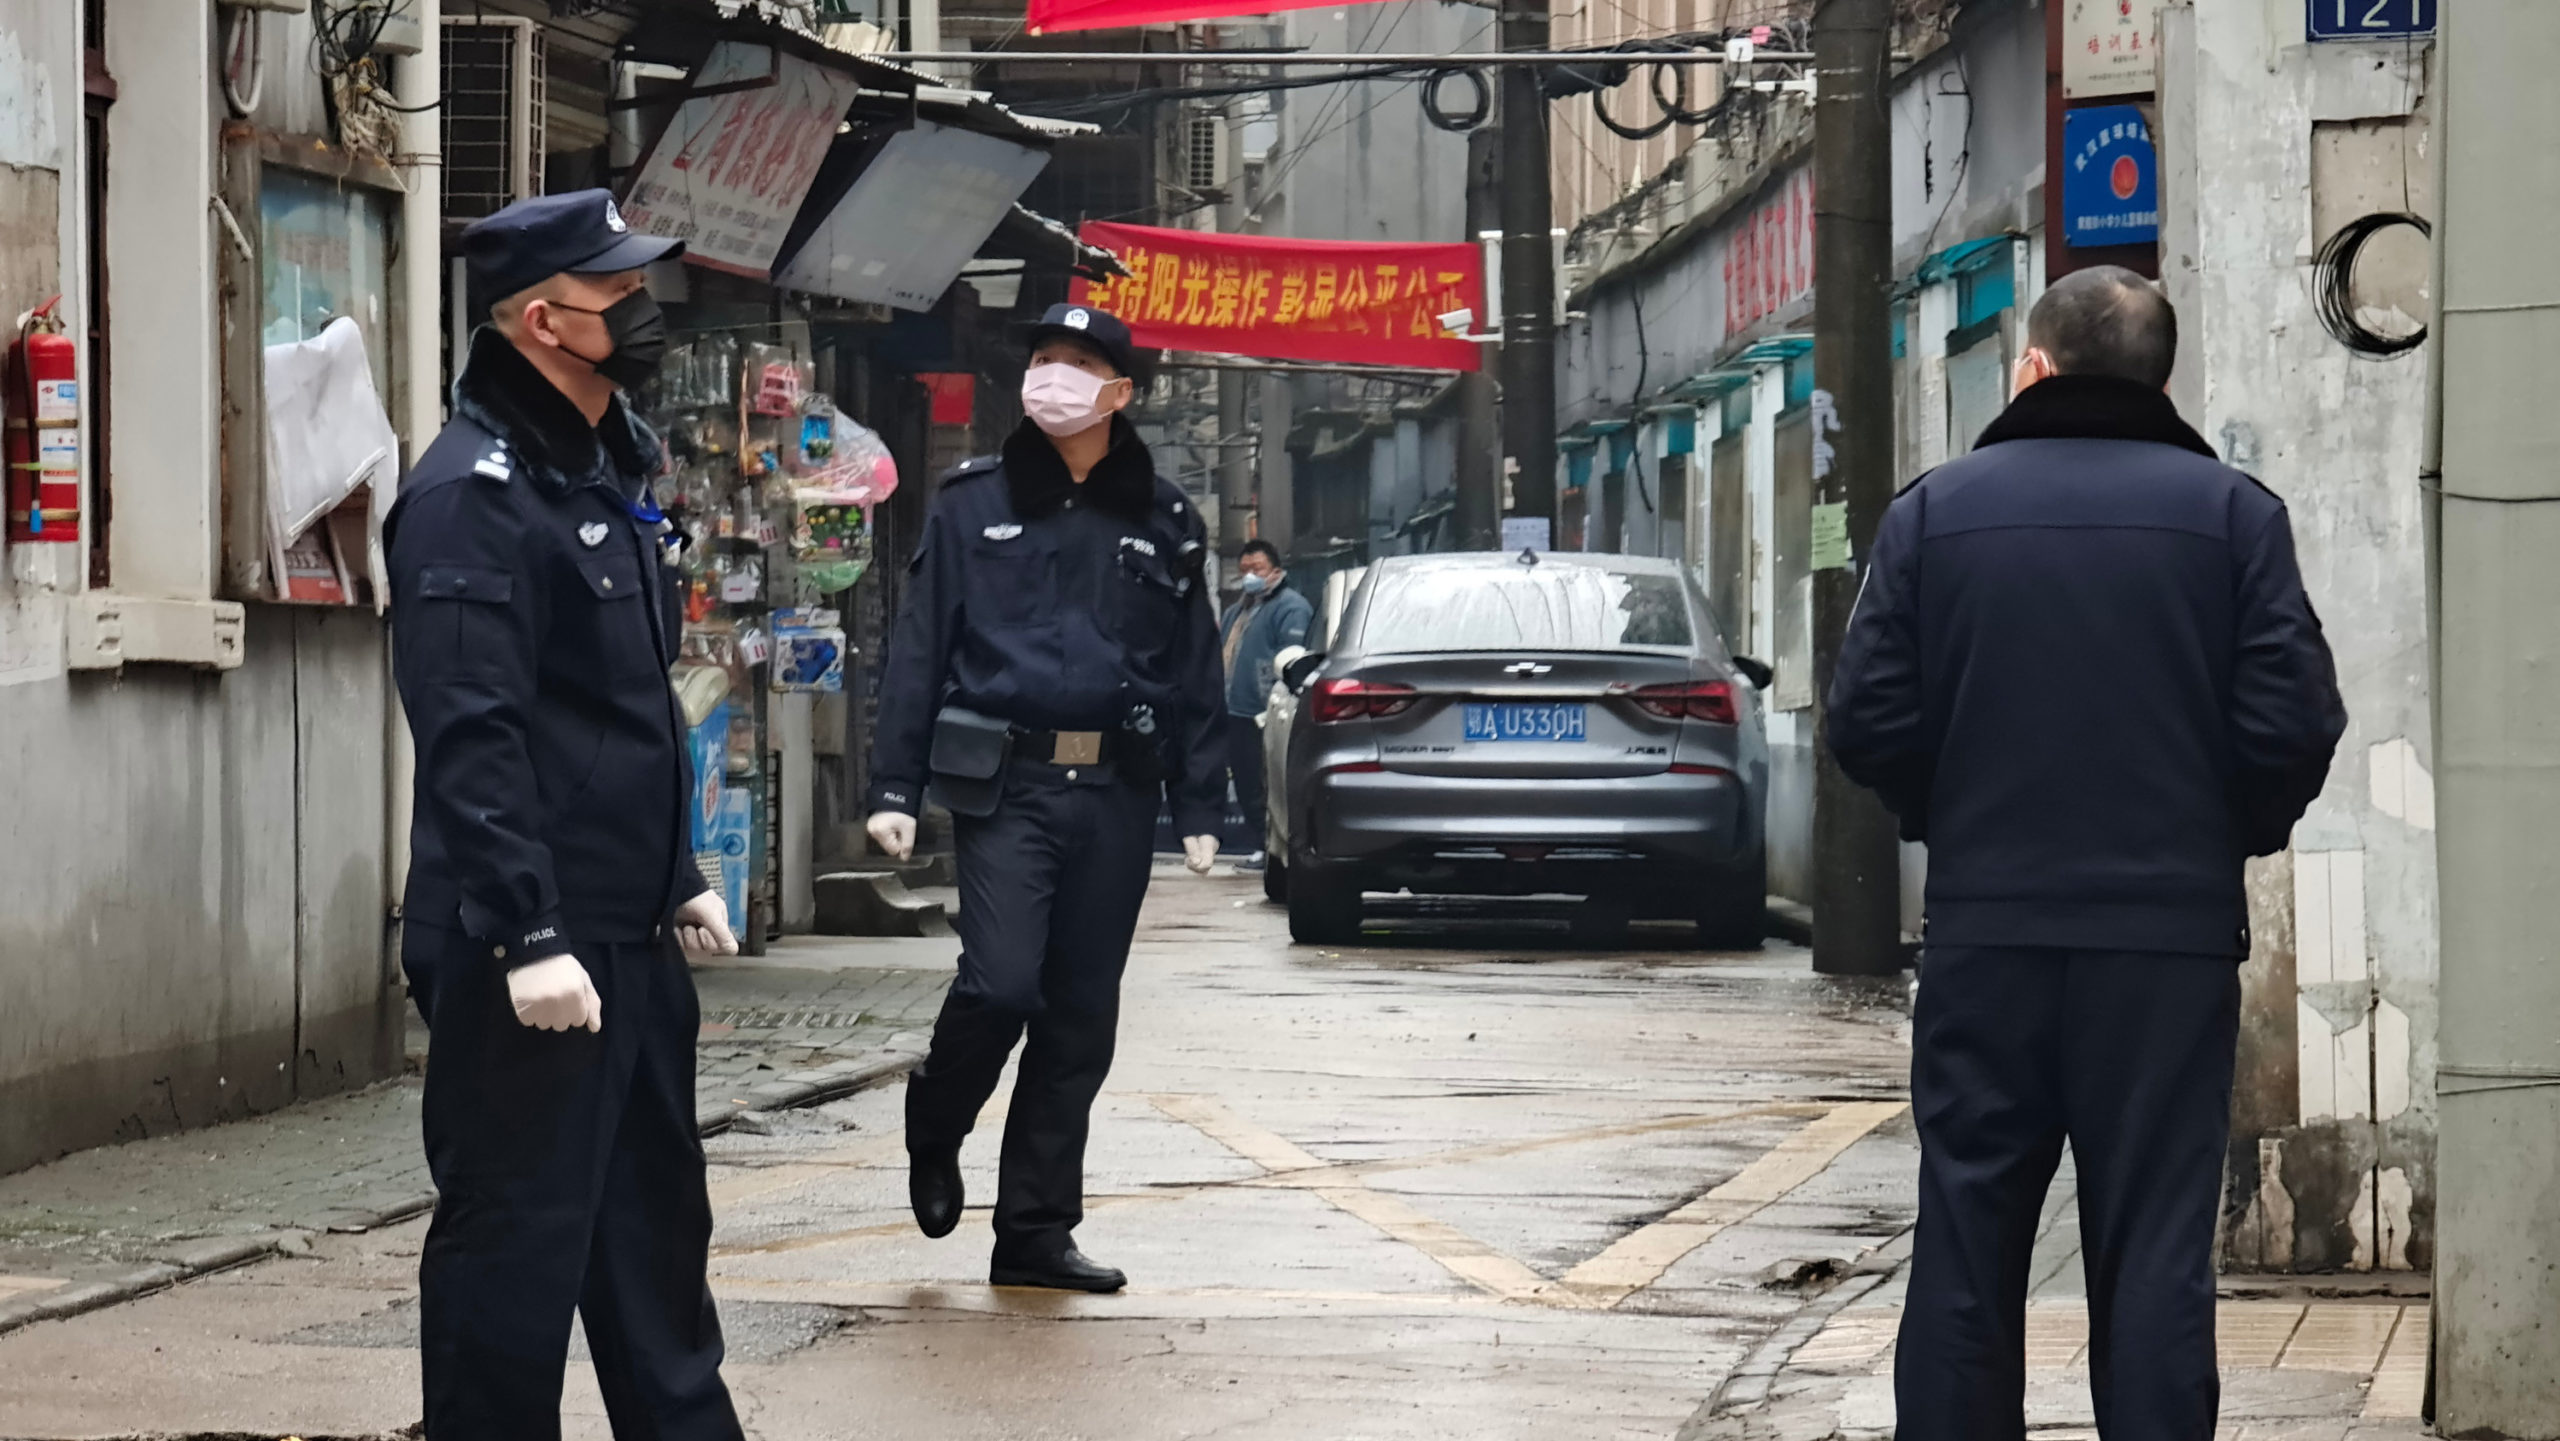 Police patrol a neighbourhood on January 22, 2020 in Wuhan, China. (Photo: Getty Images)